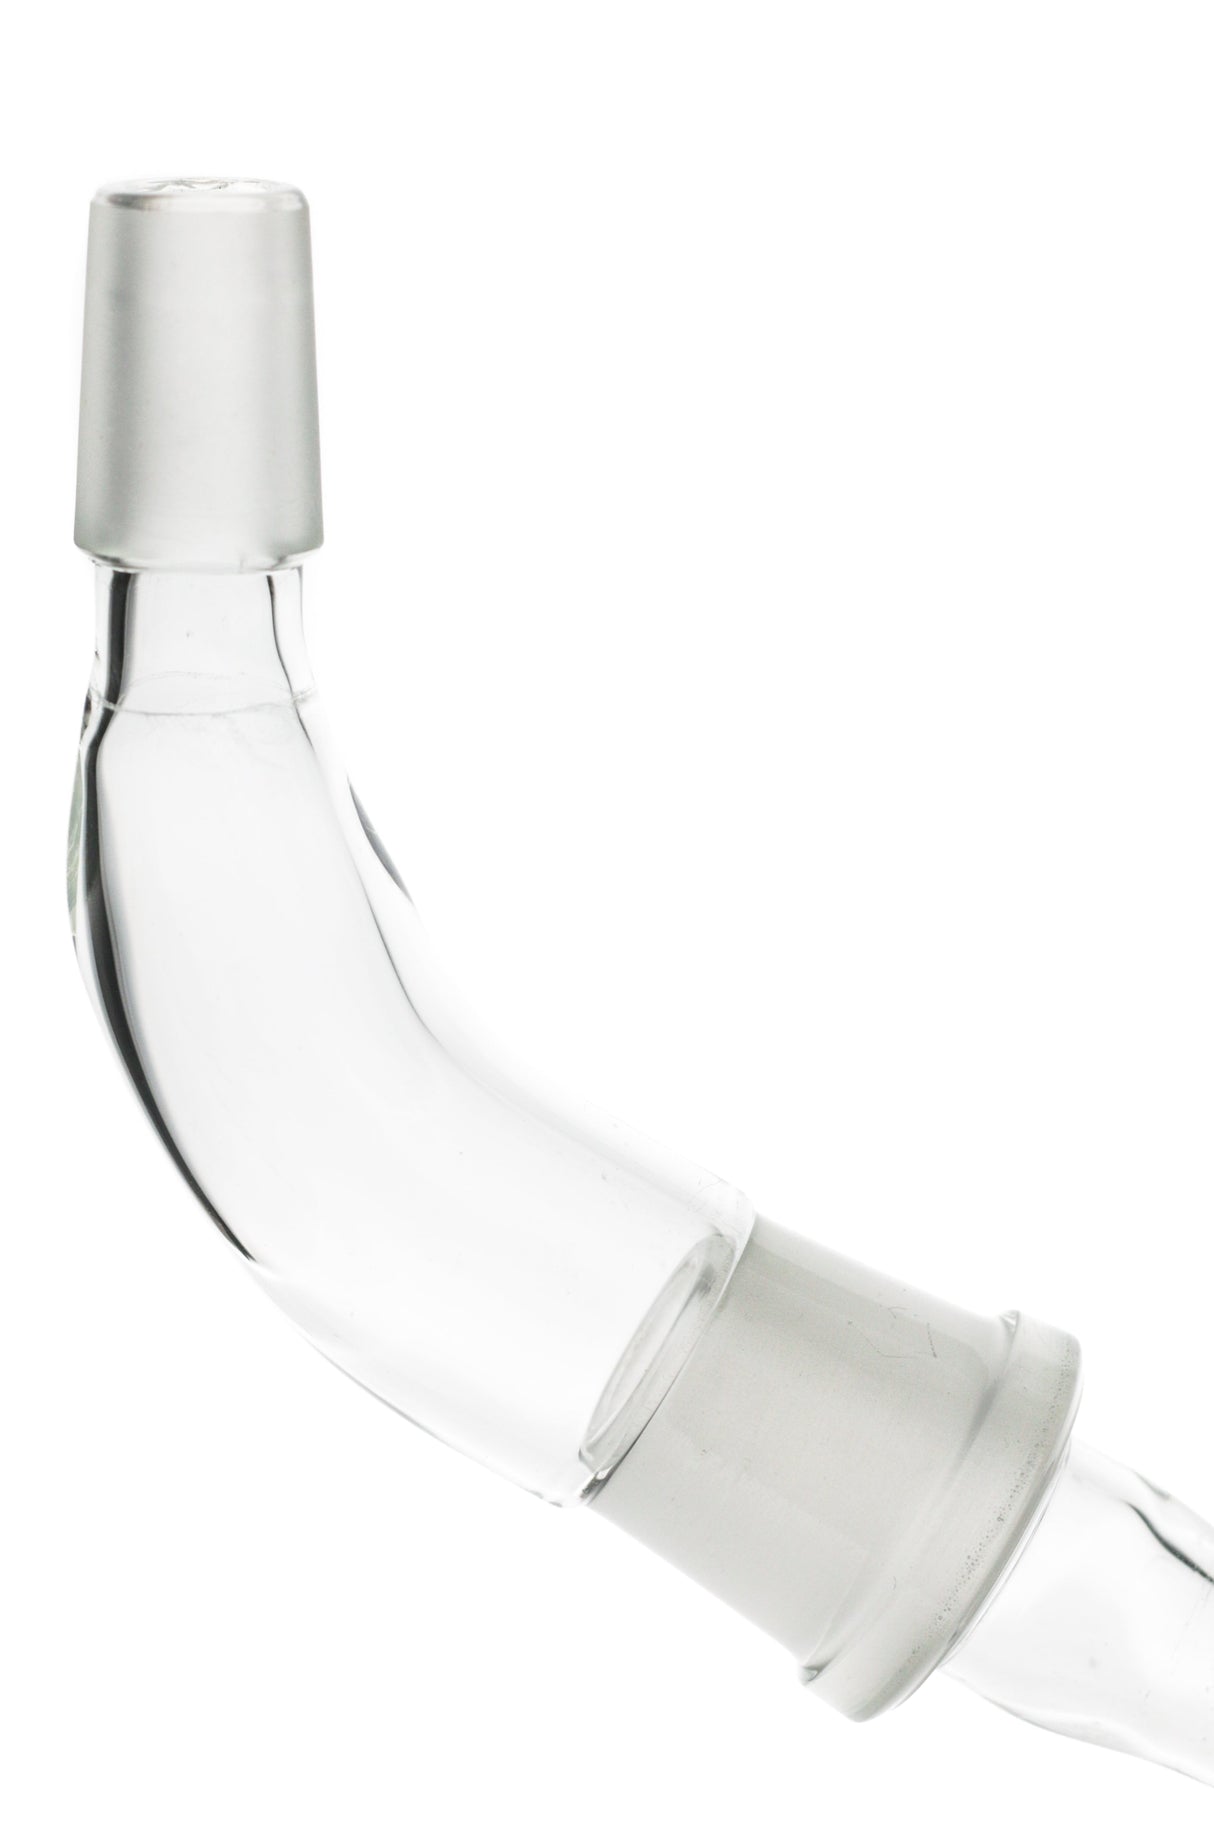 TAG - Quartz Angle Adapter for Bongs - Clear, Durable Side View